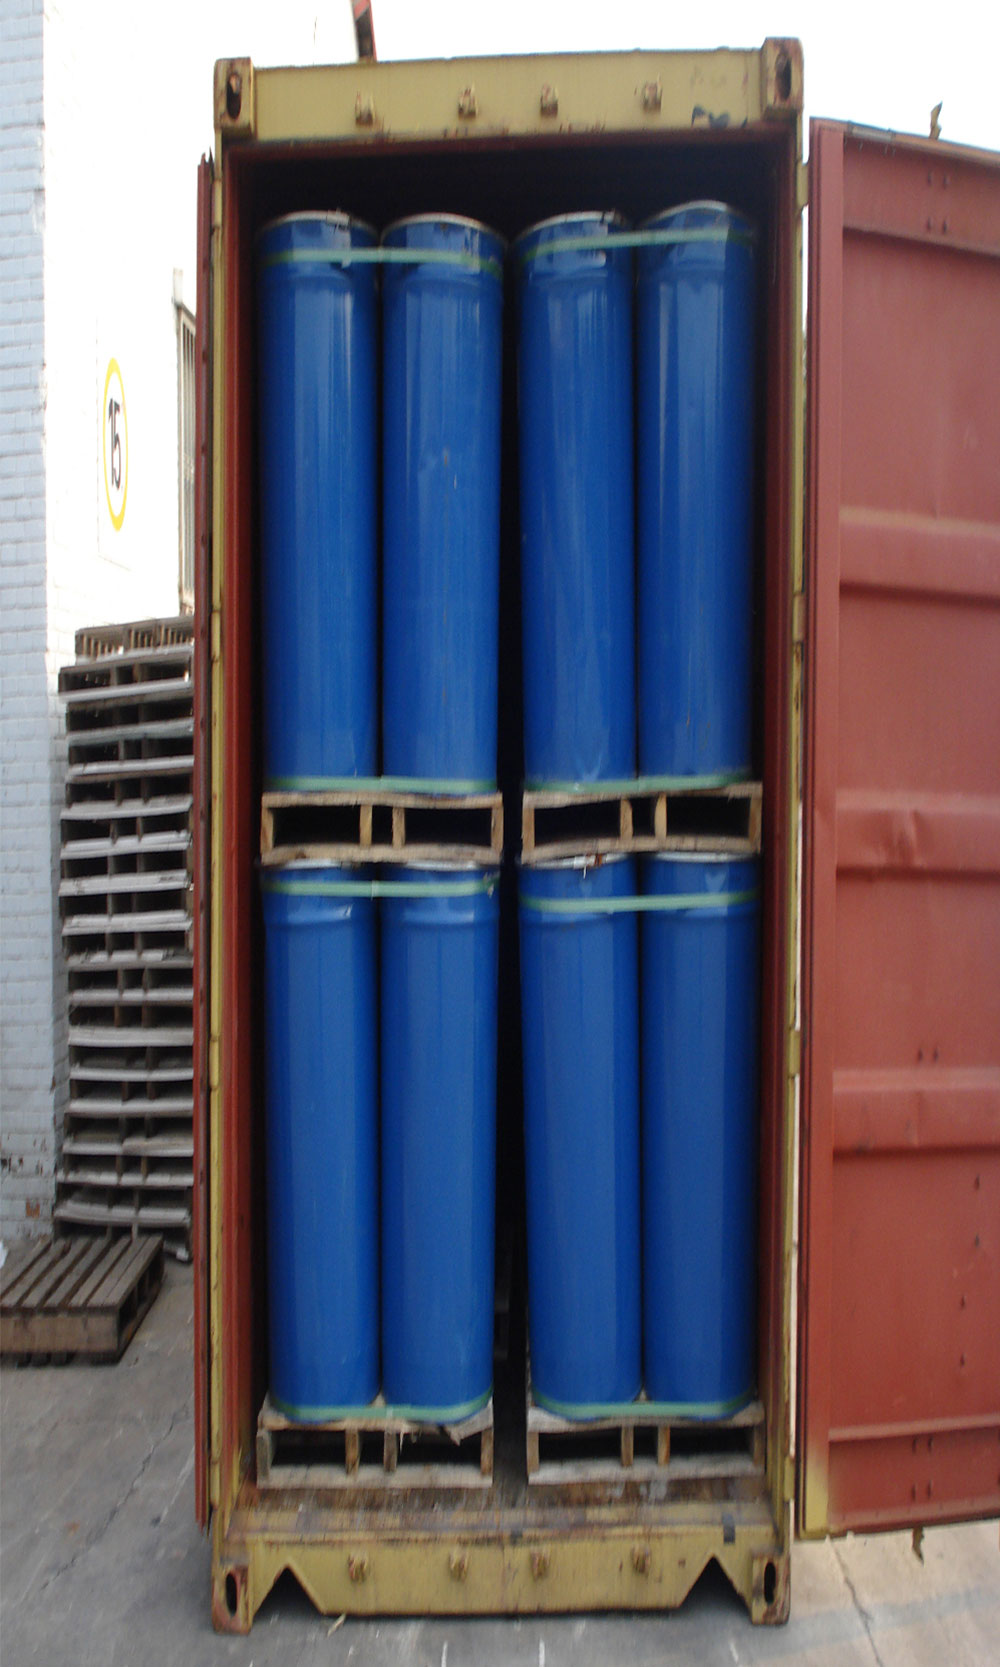 Barrels in Container